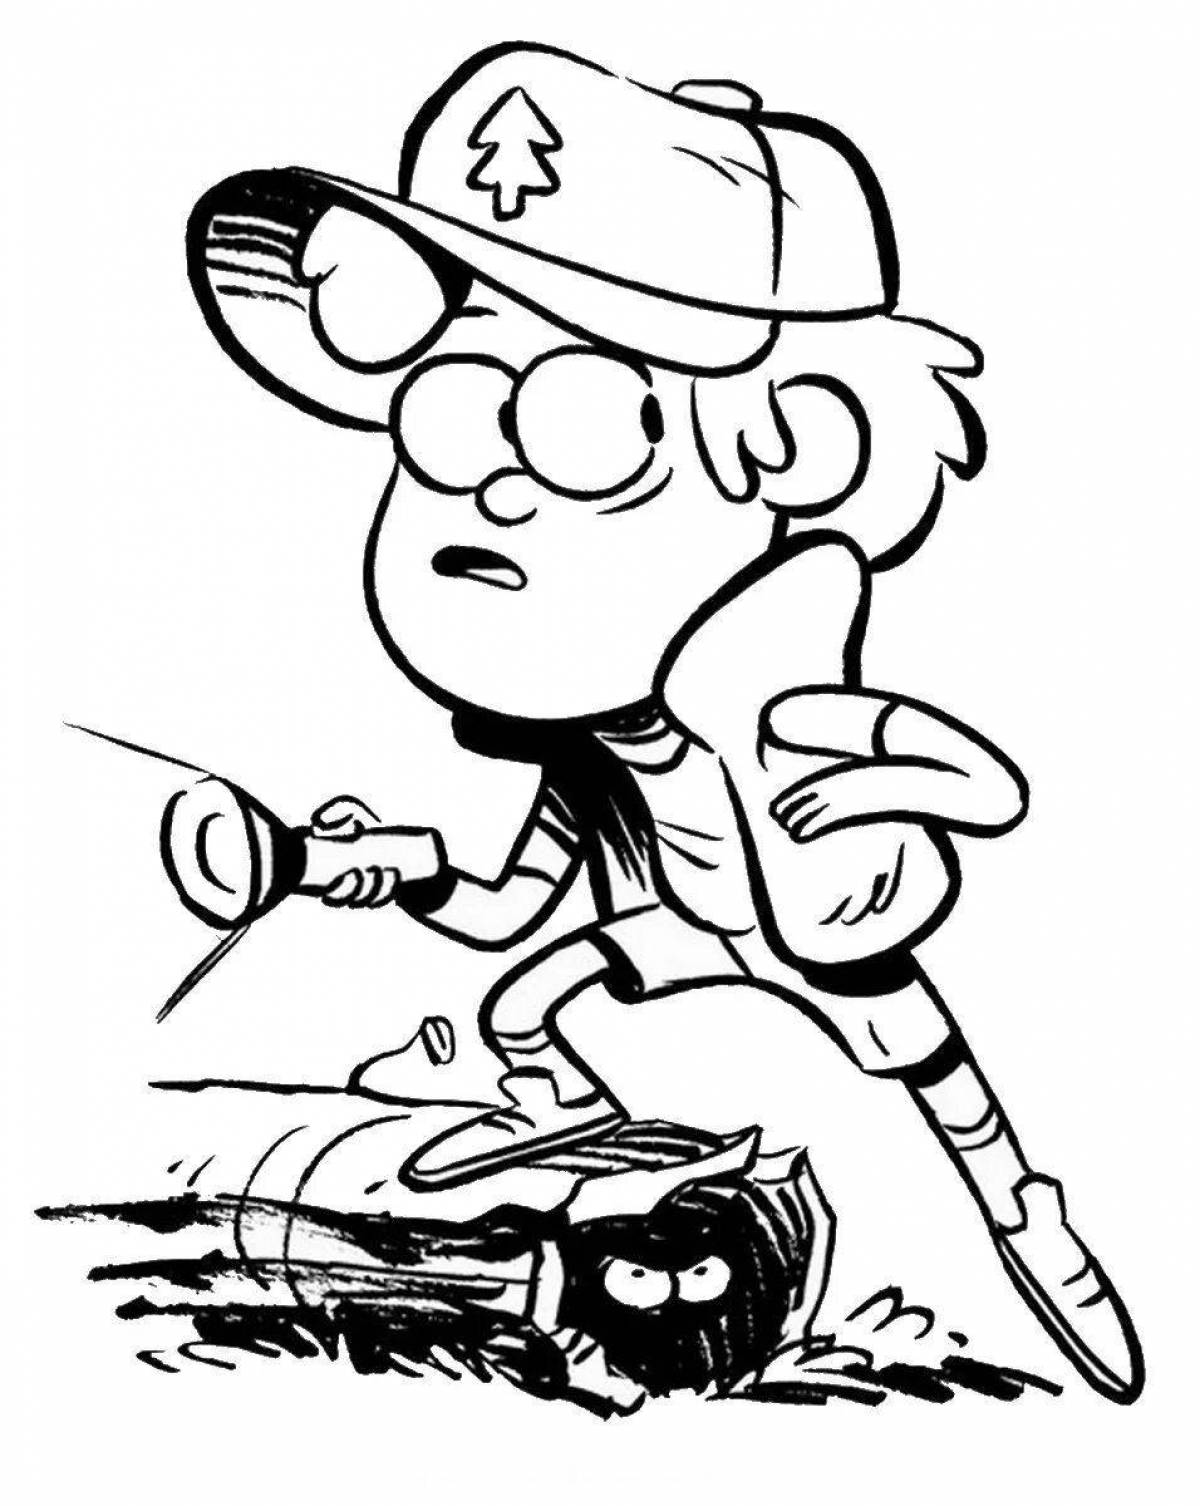 Dipper from gravity falls #1